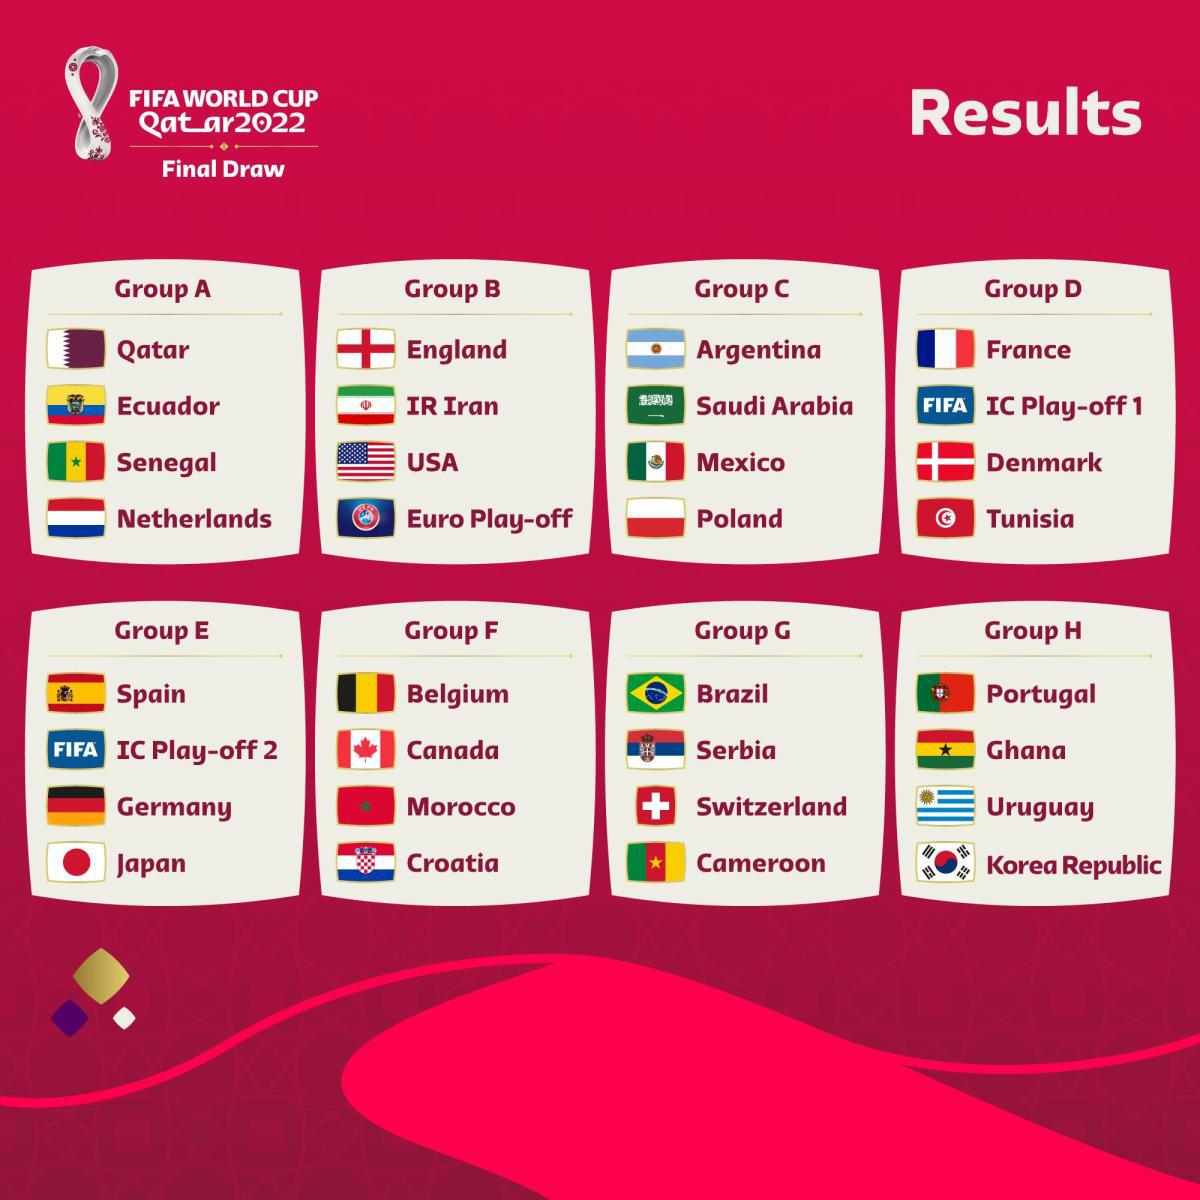 The World Cup is divided into 32 teams.